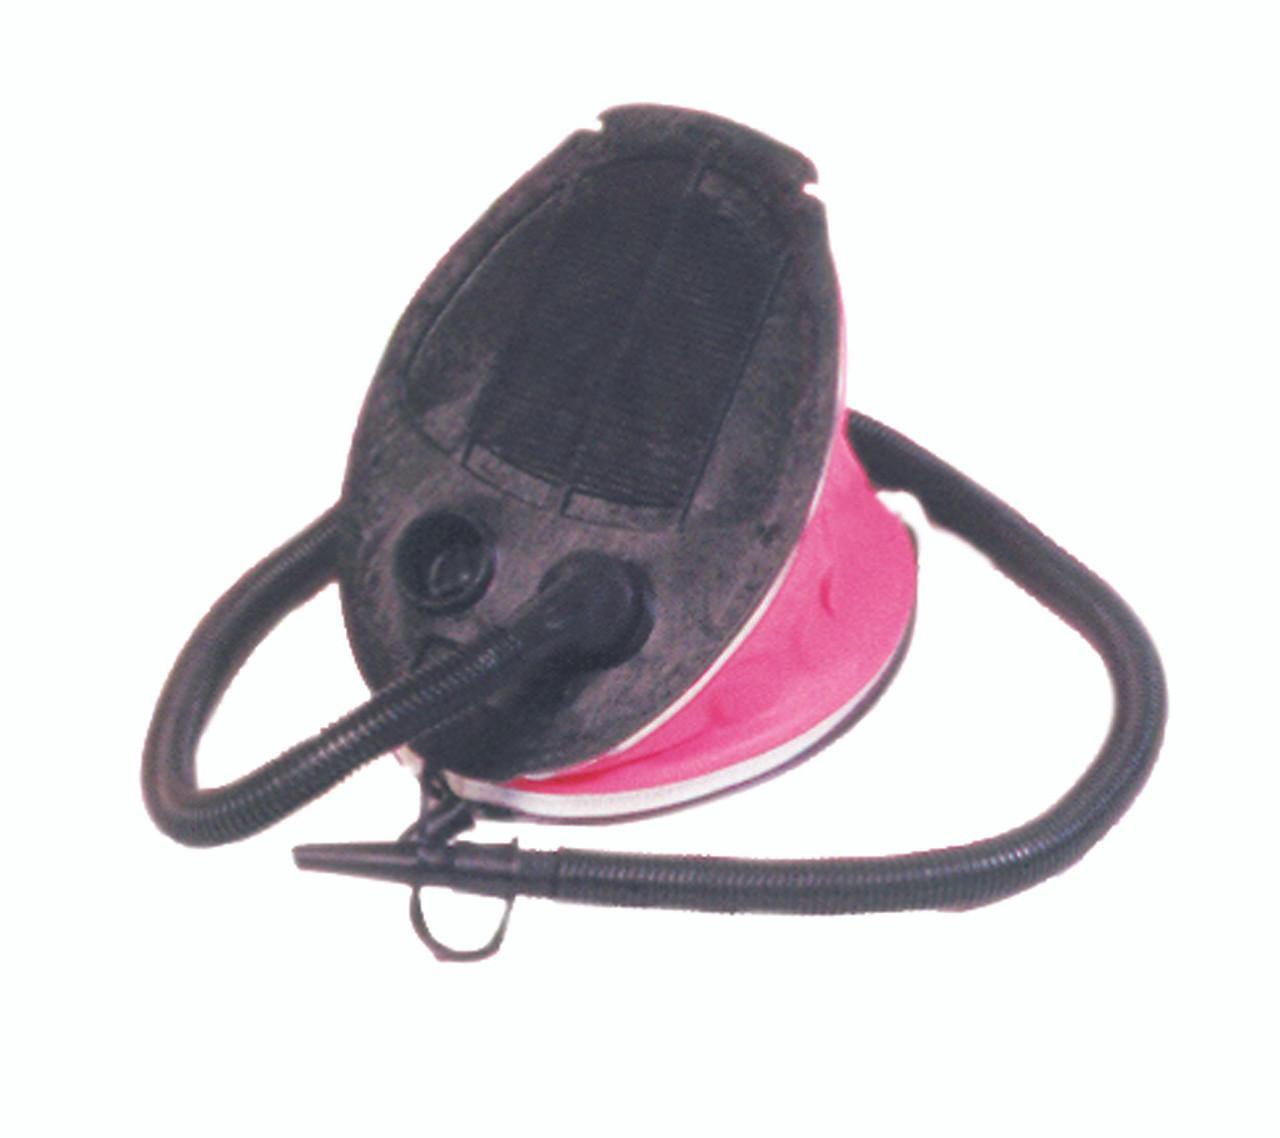 Inflatable Exercise Ball - Accessory - Small Bellow Pump